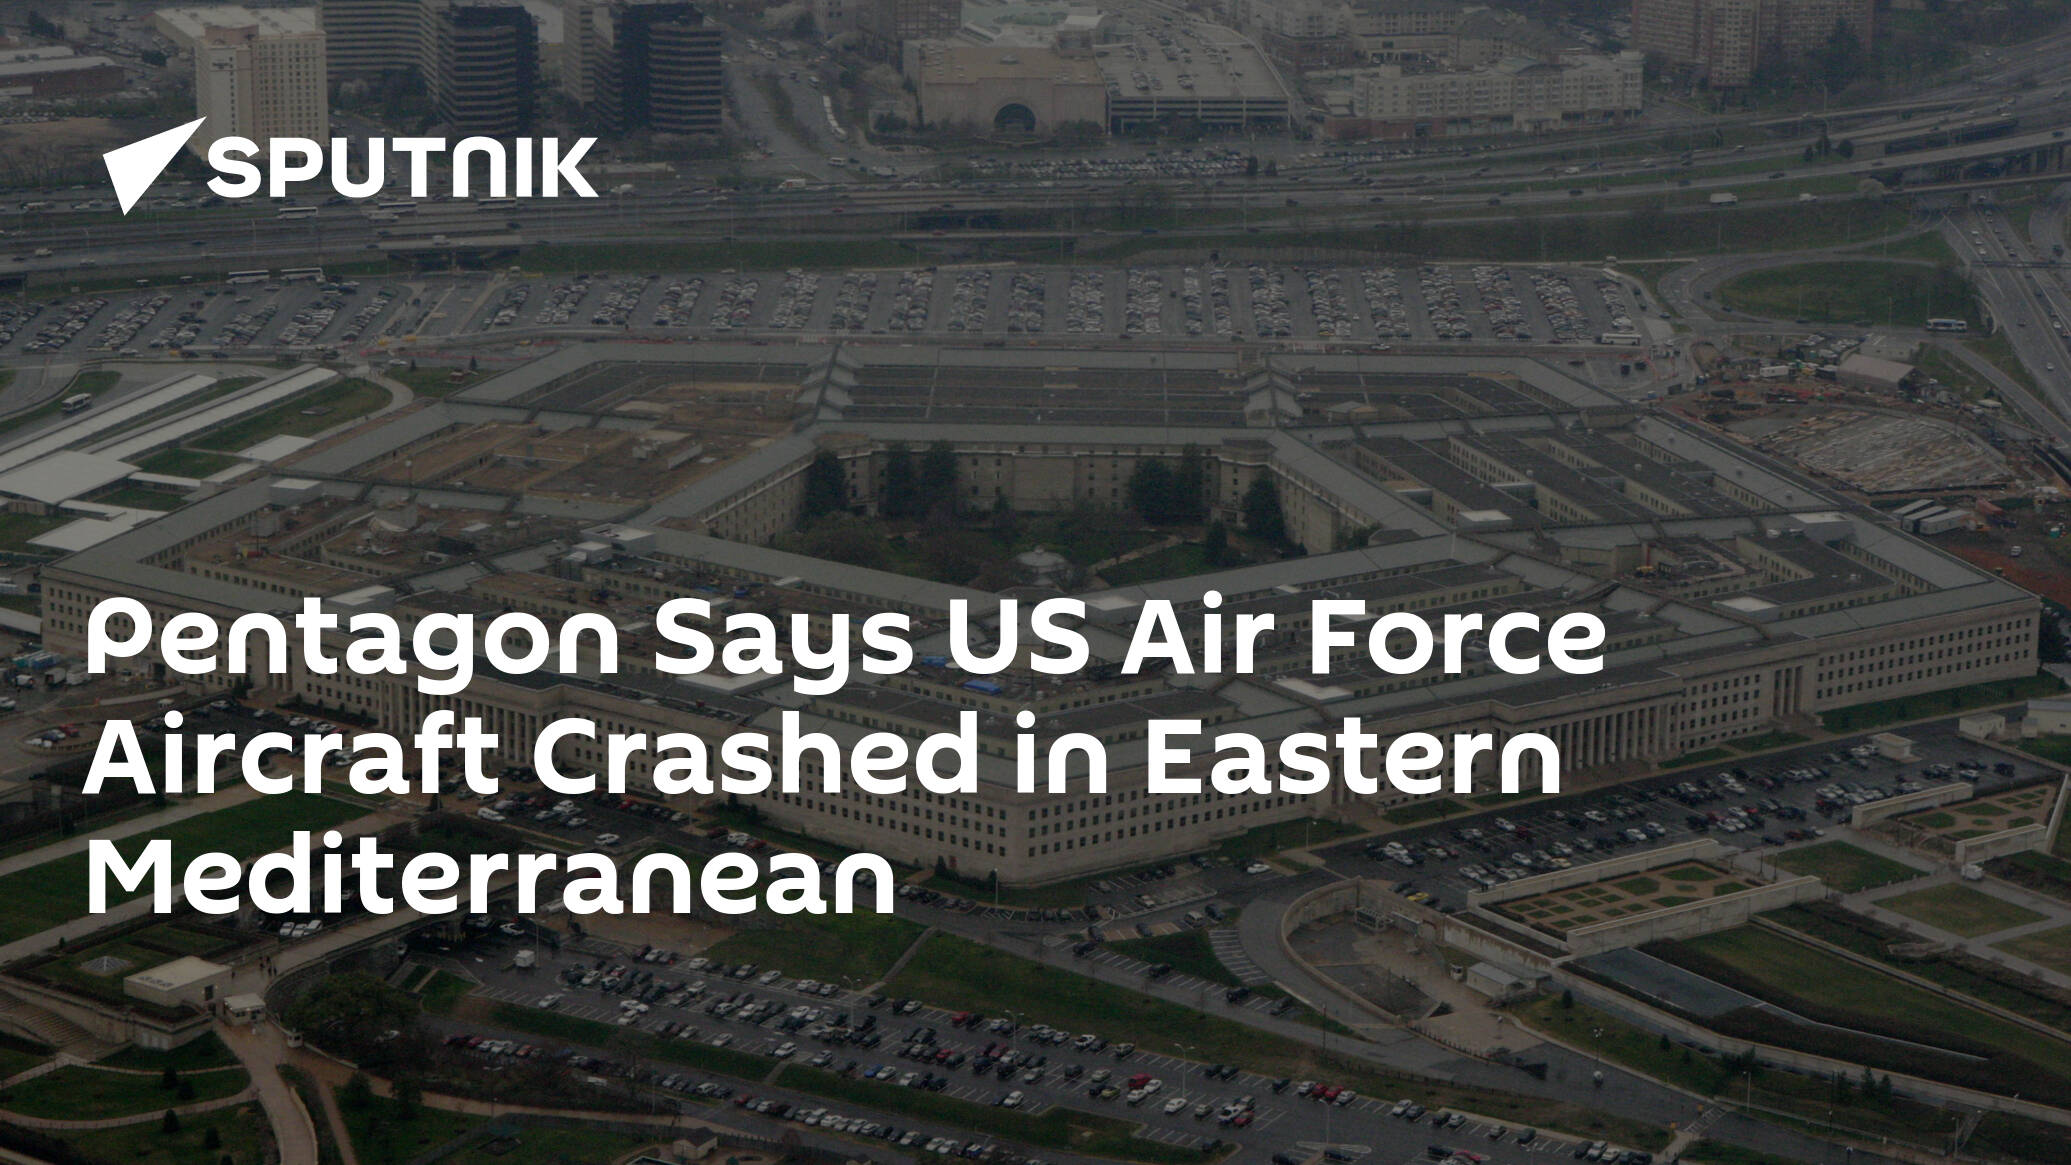 Pentagon Says US Air Force Aircraft Crashed in Eastern Mediterranean